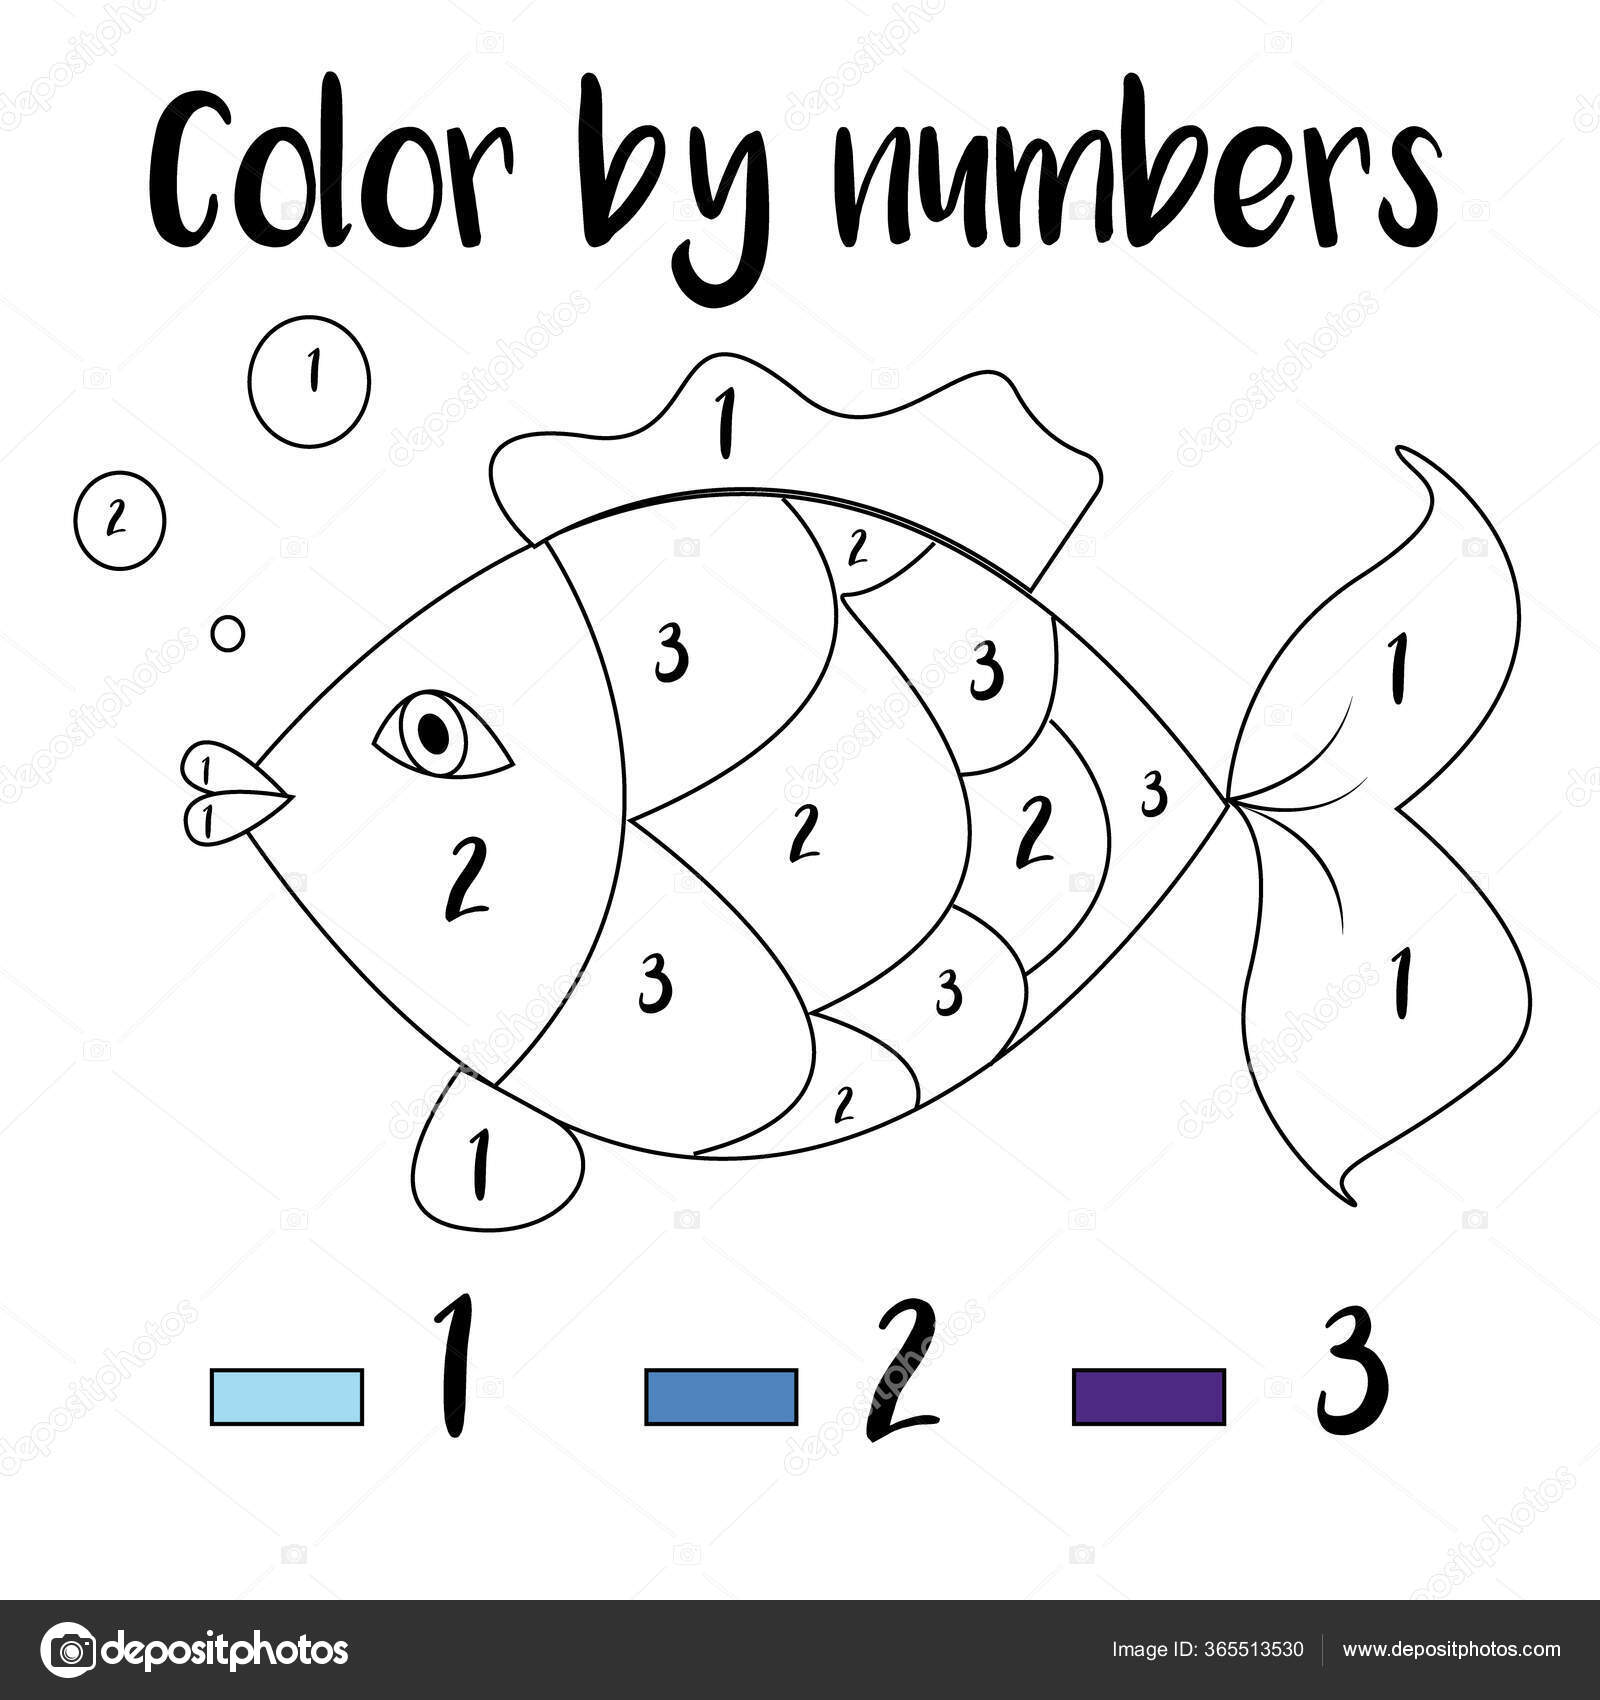 Preschool counting activities coloring page colorful illustration color numbers printable stock photo by evamorris